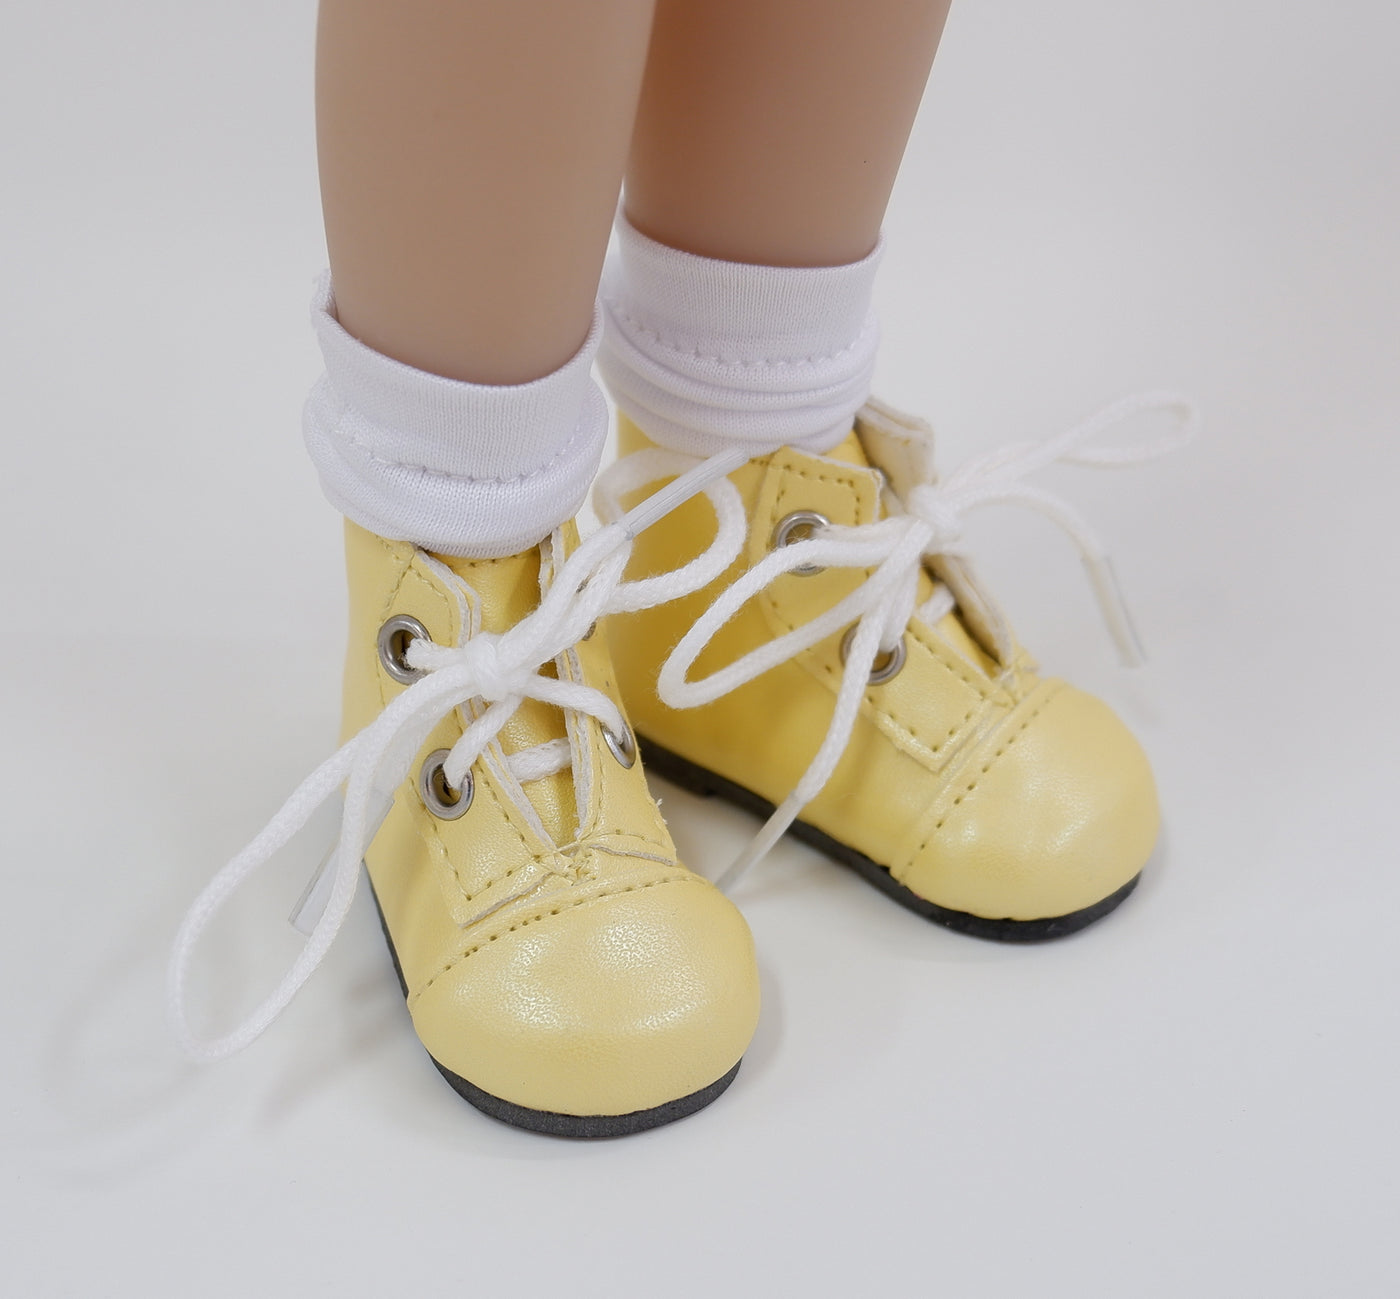 Ankle Lace Up Boots - Banana Yellow